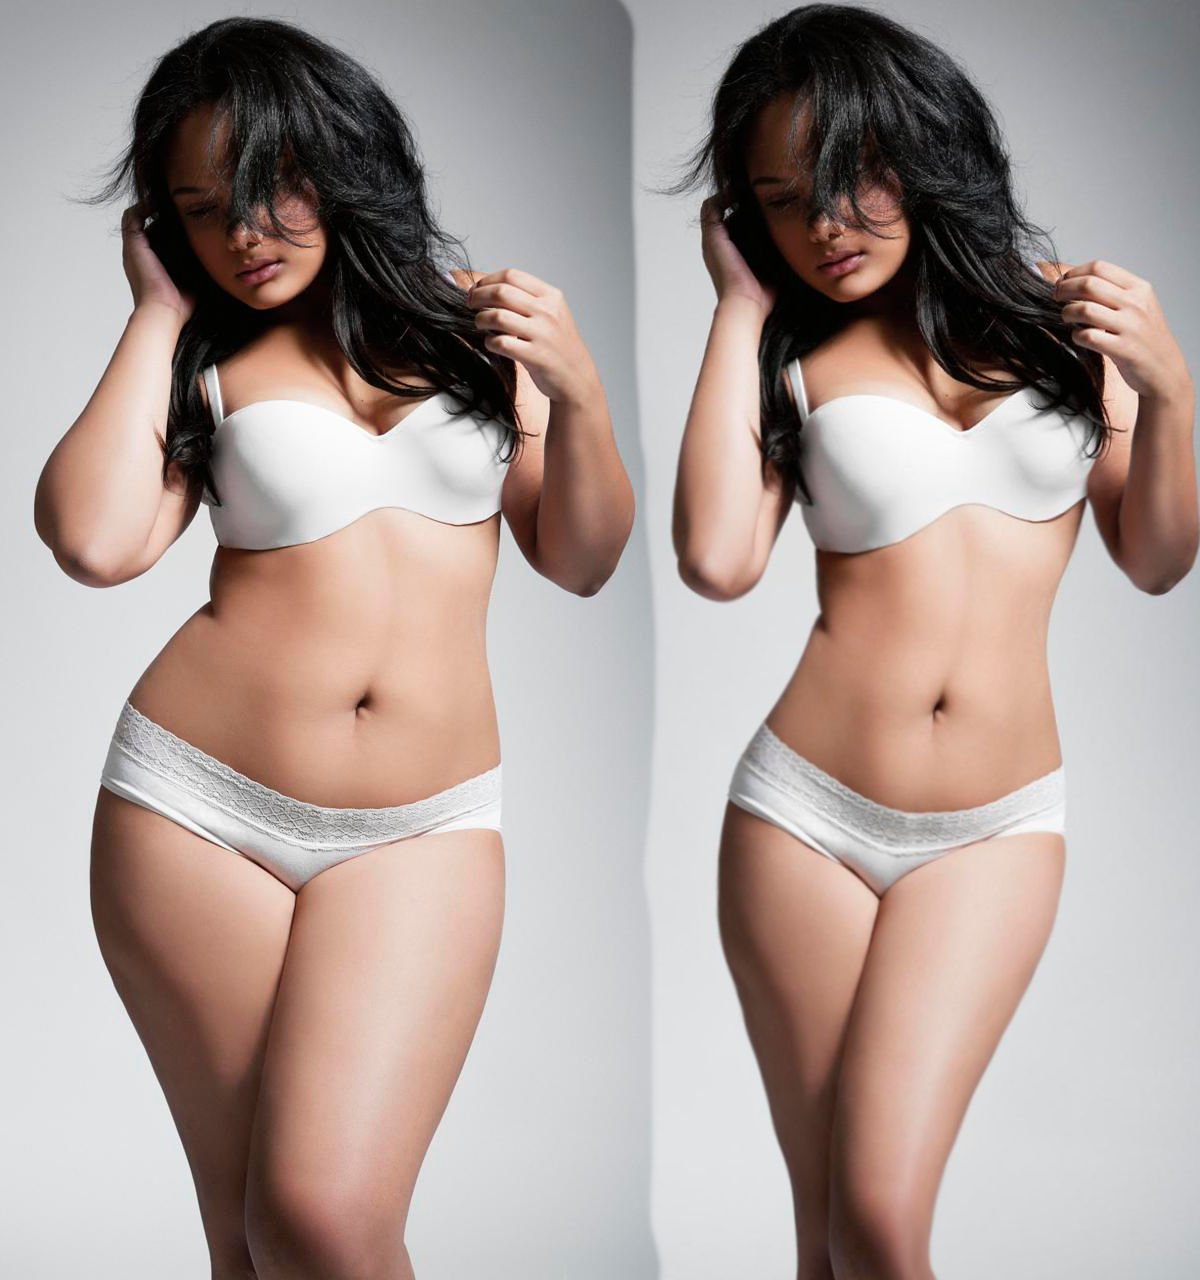 Yesterday, the above image was shared by Elly Mayday, a "plus sized&qu...